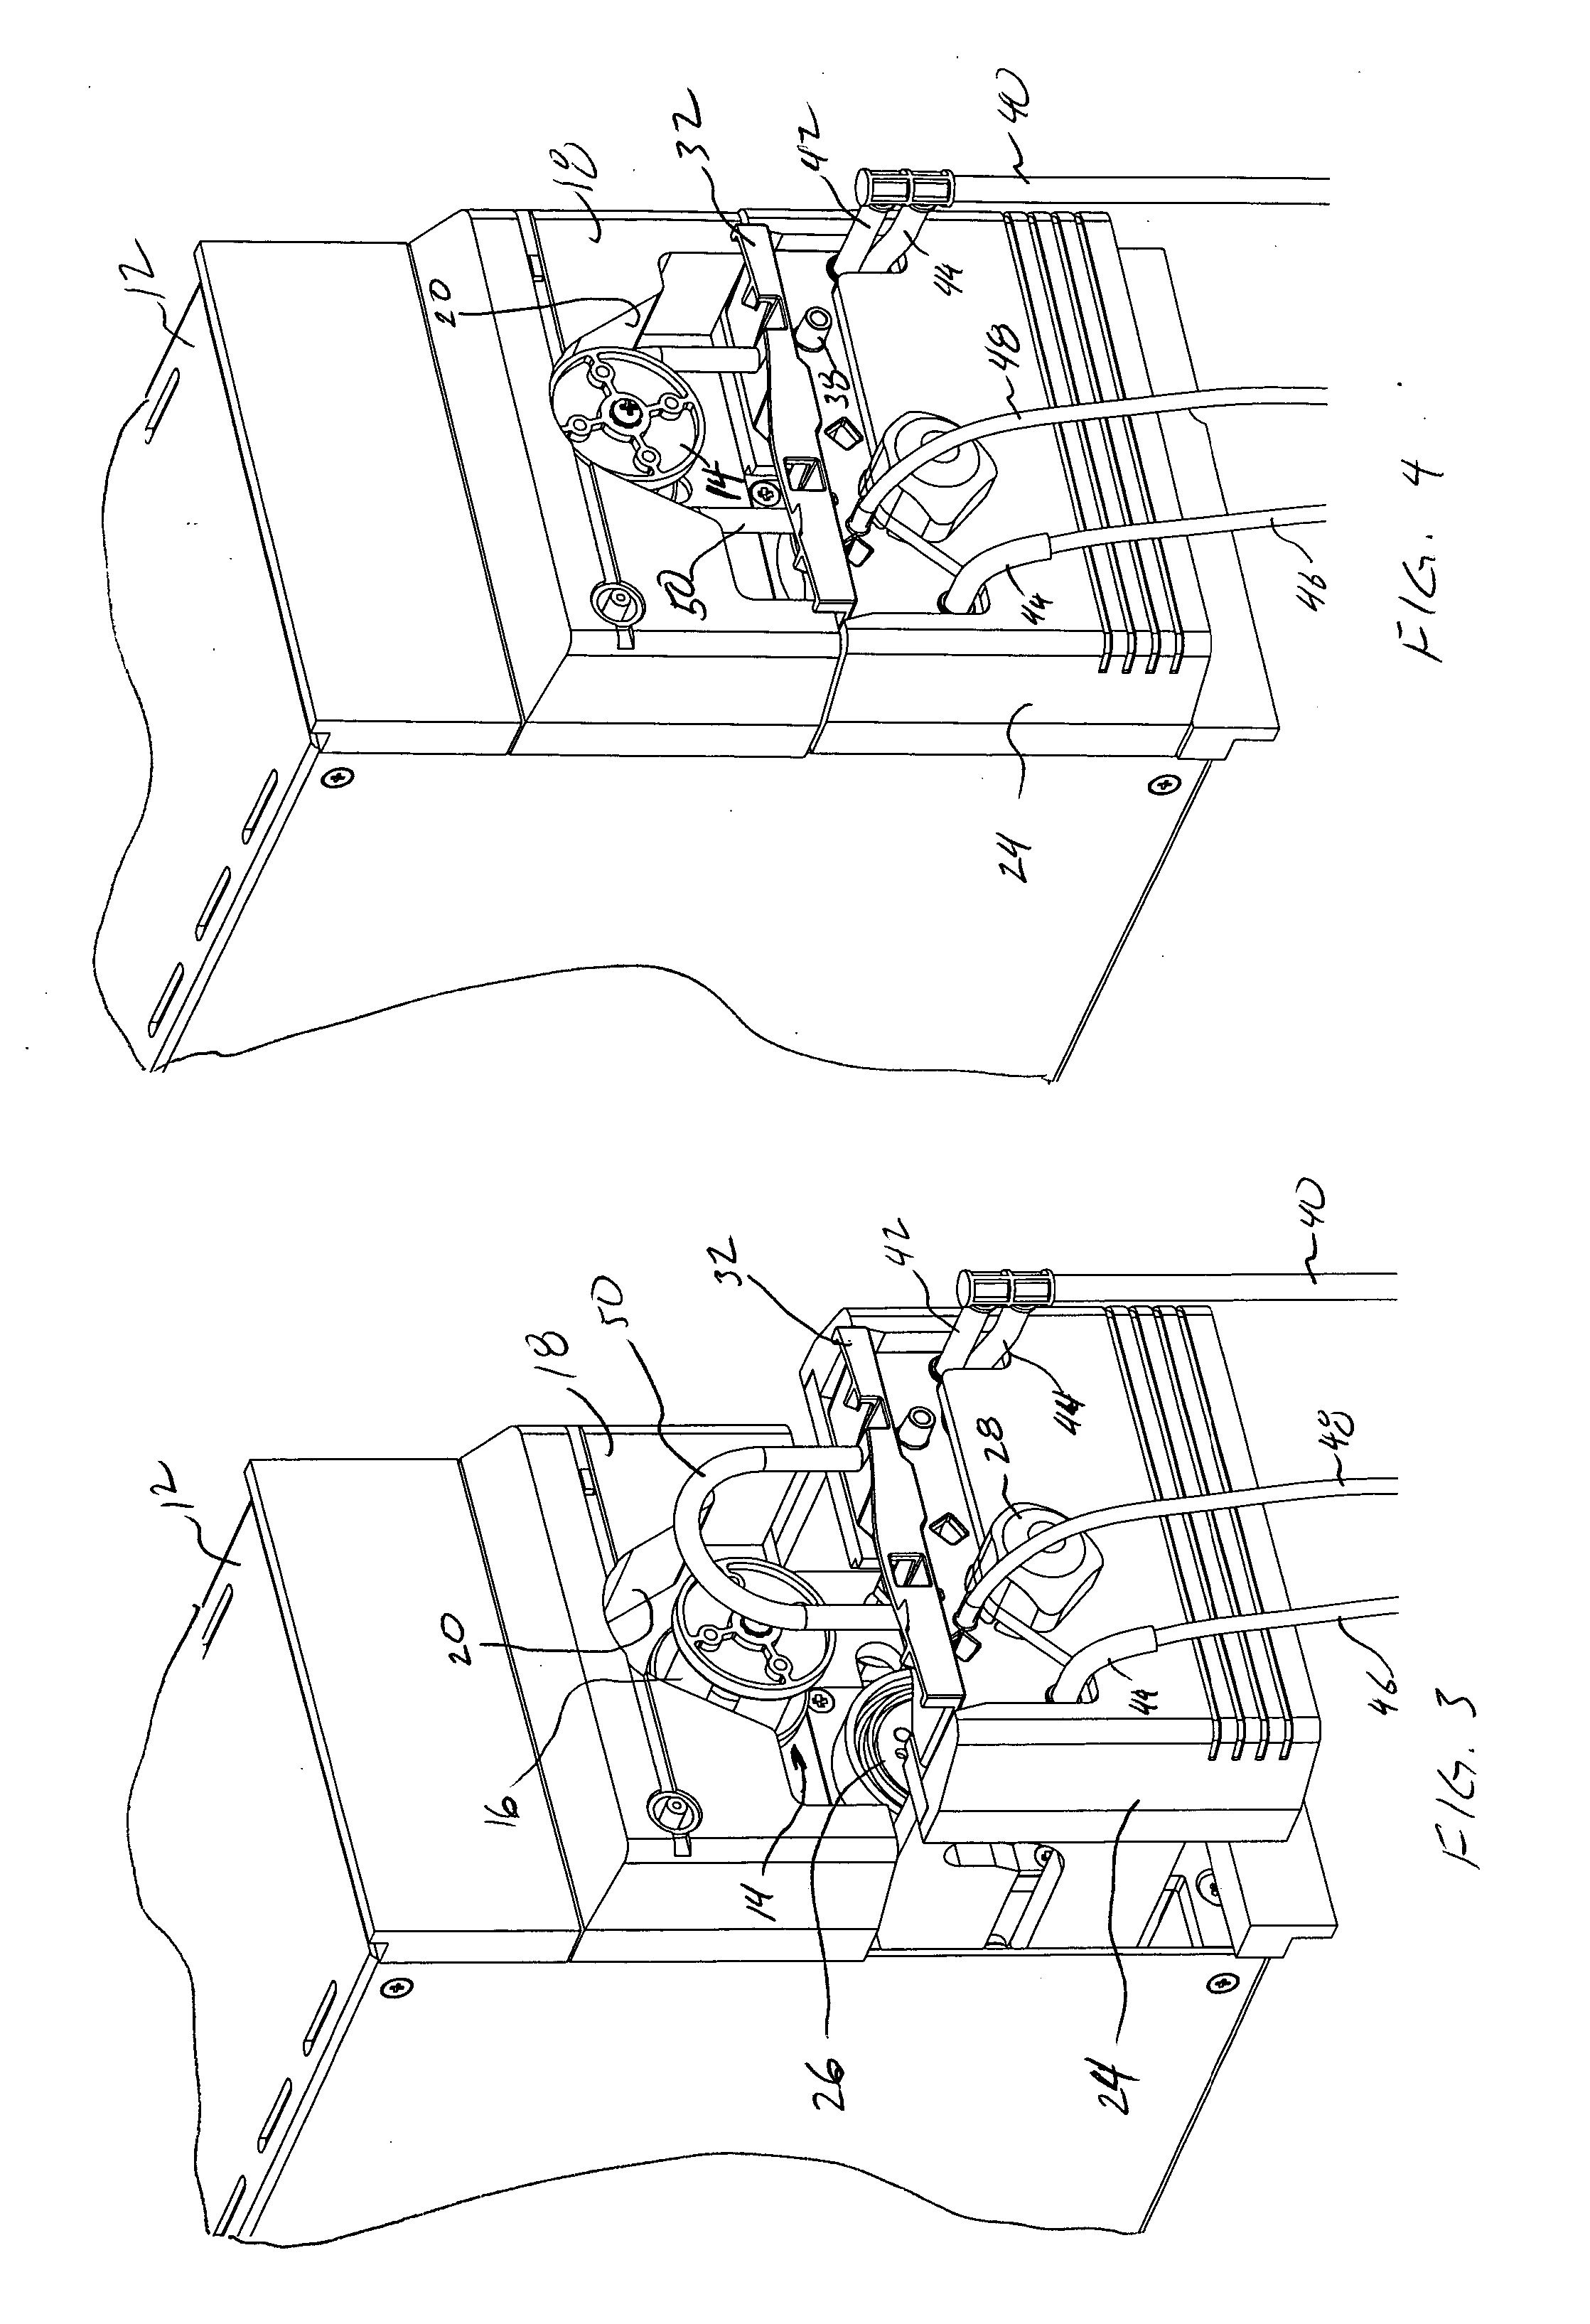 Peristaltic pump with air venting via the movement of a pump head or a backing plate during surgery